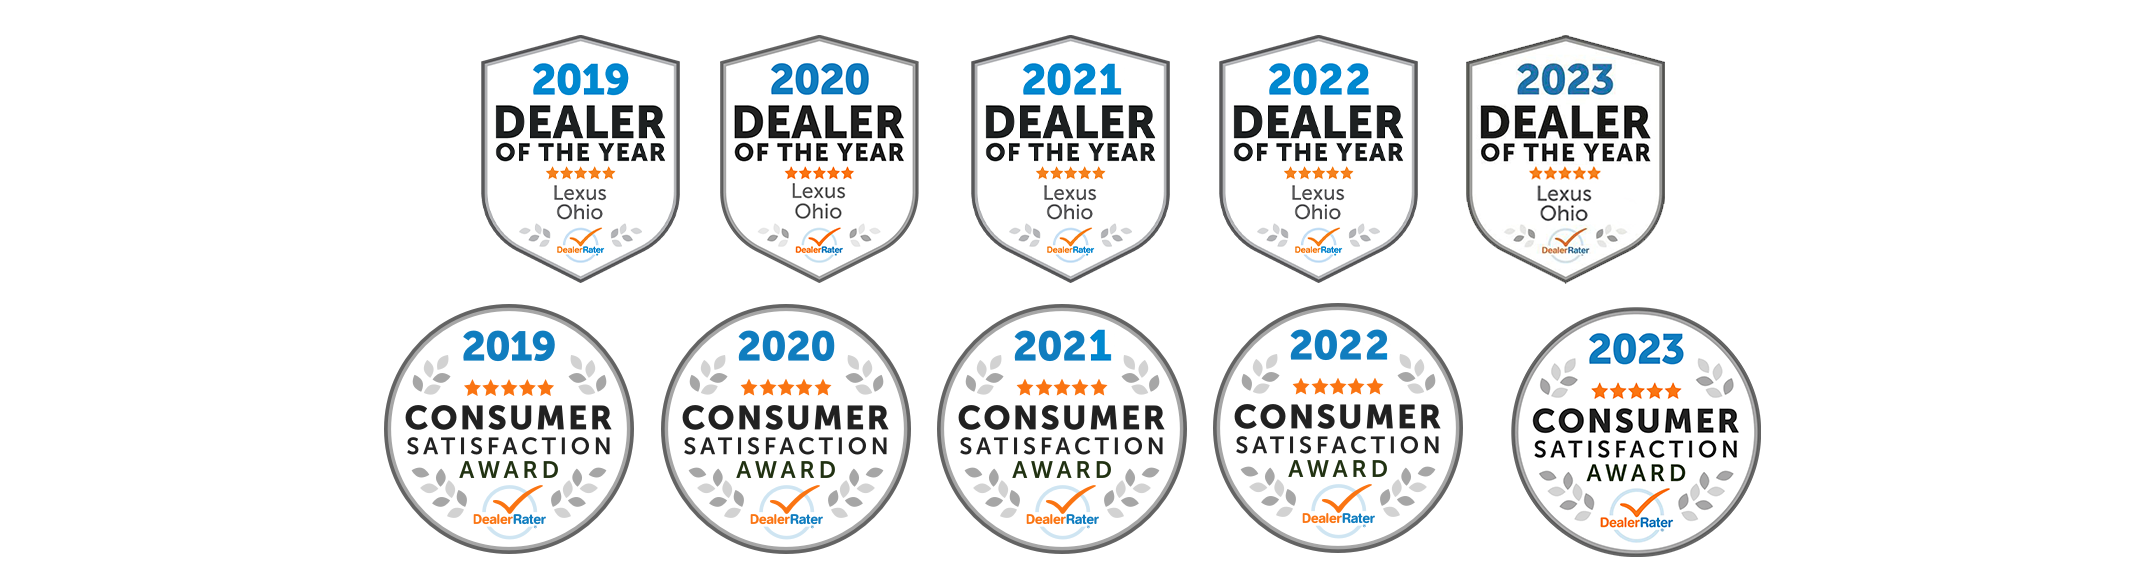 Metro Lexus - Dealer of the Year - Awards & Recognition